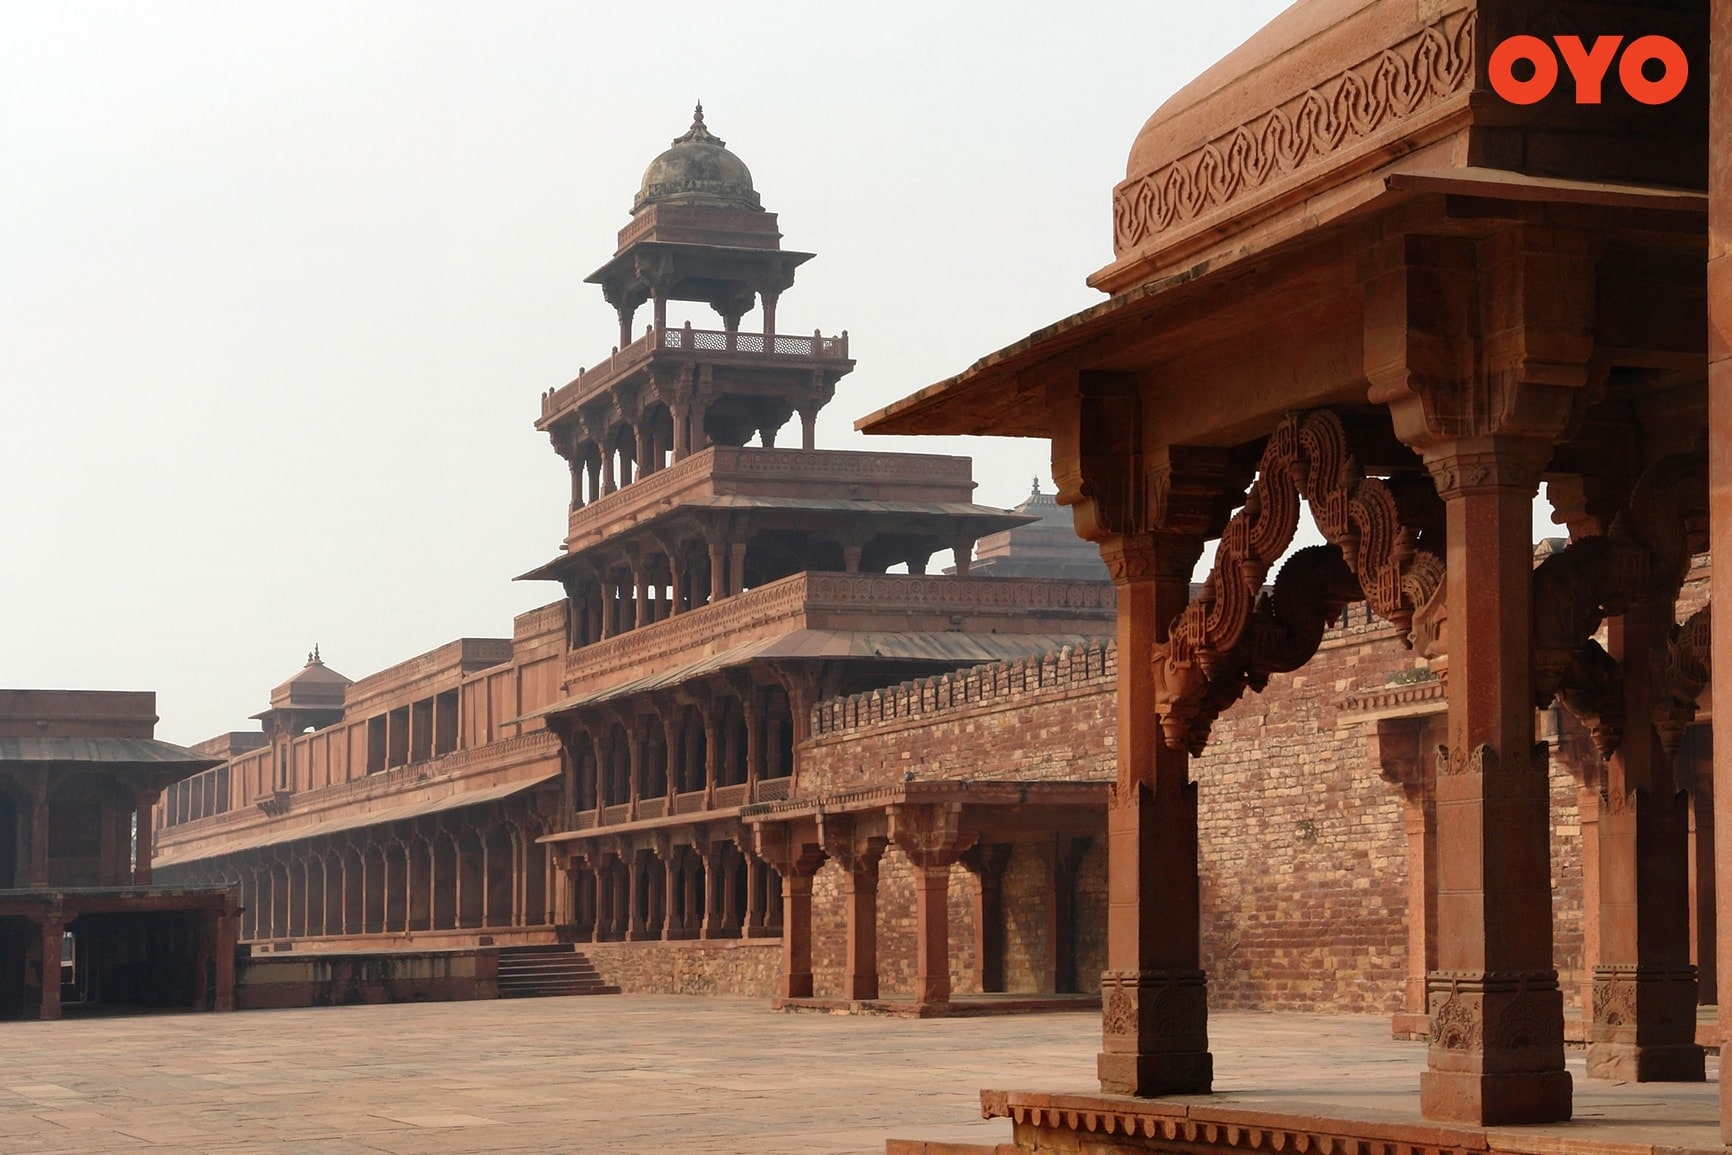 Fatehpur Sikri, Agra - one of the most famous historical places in India